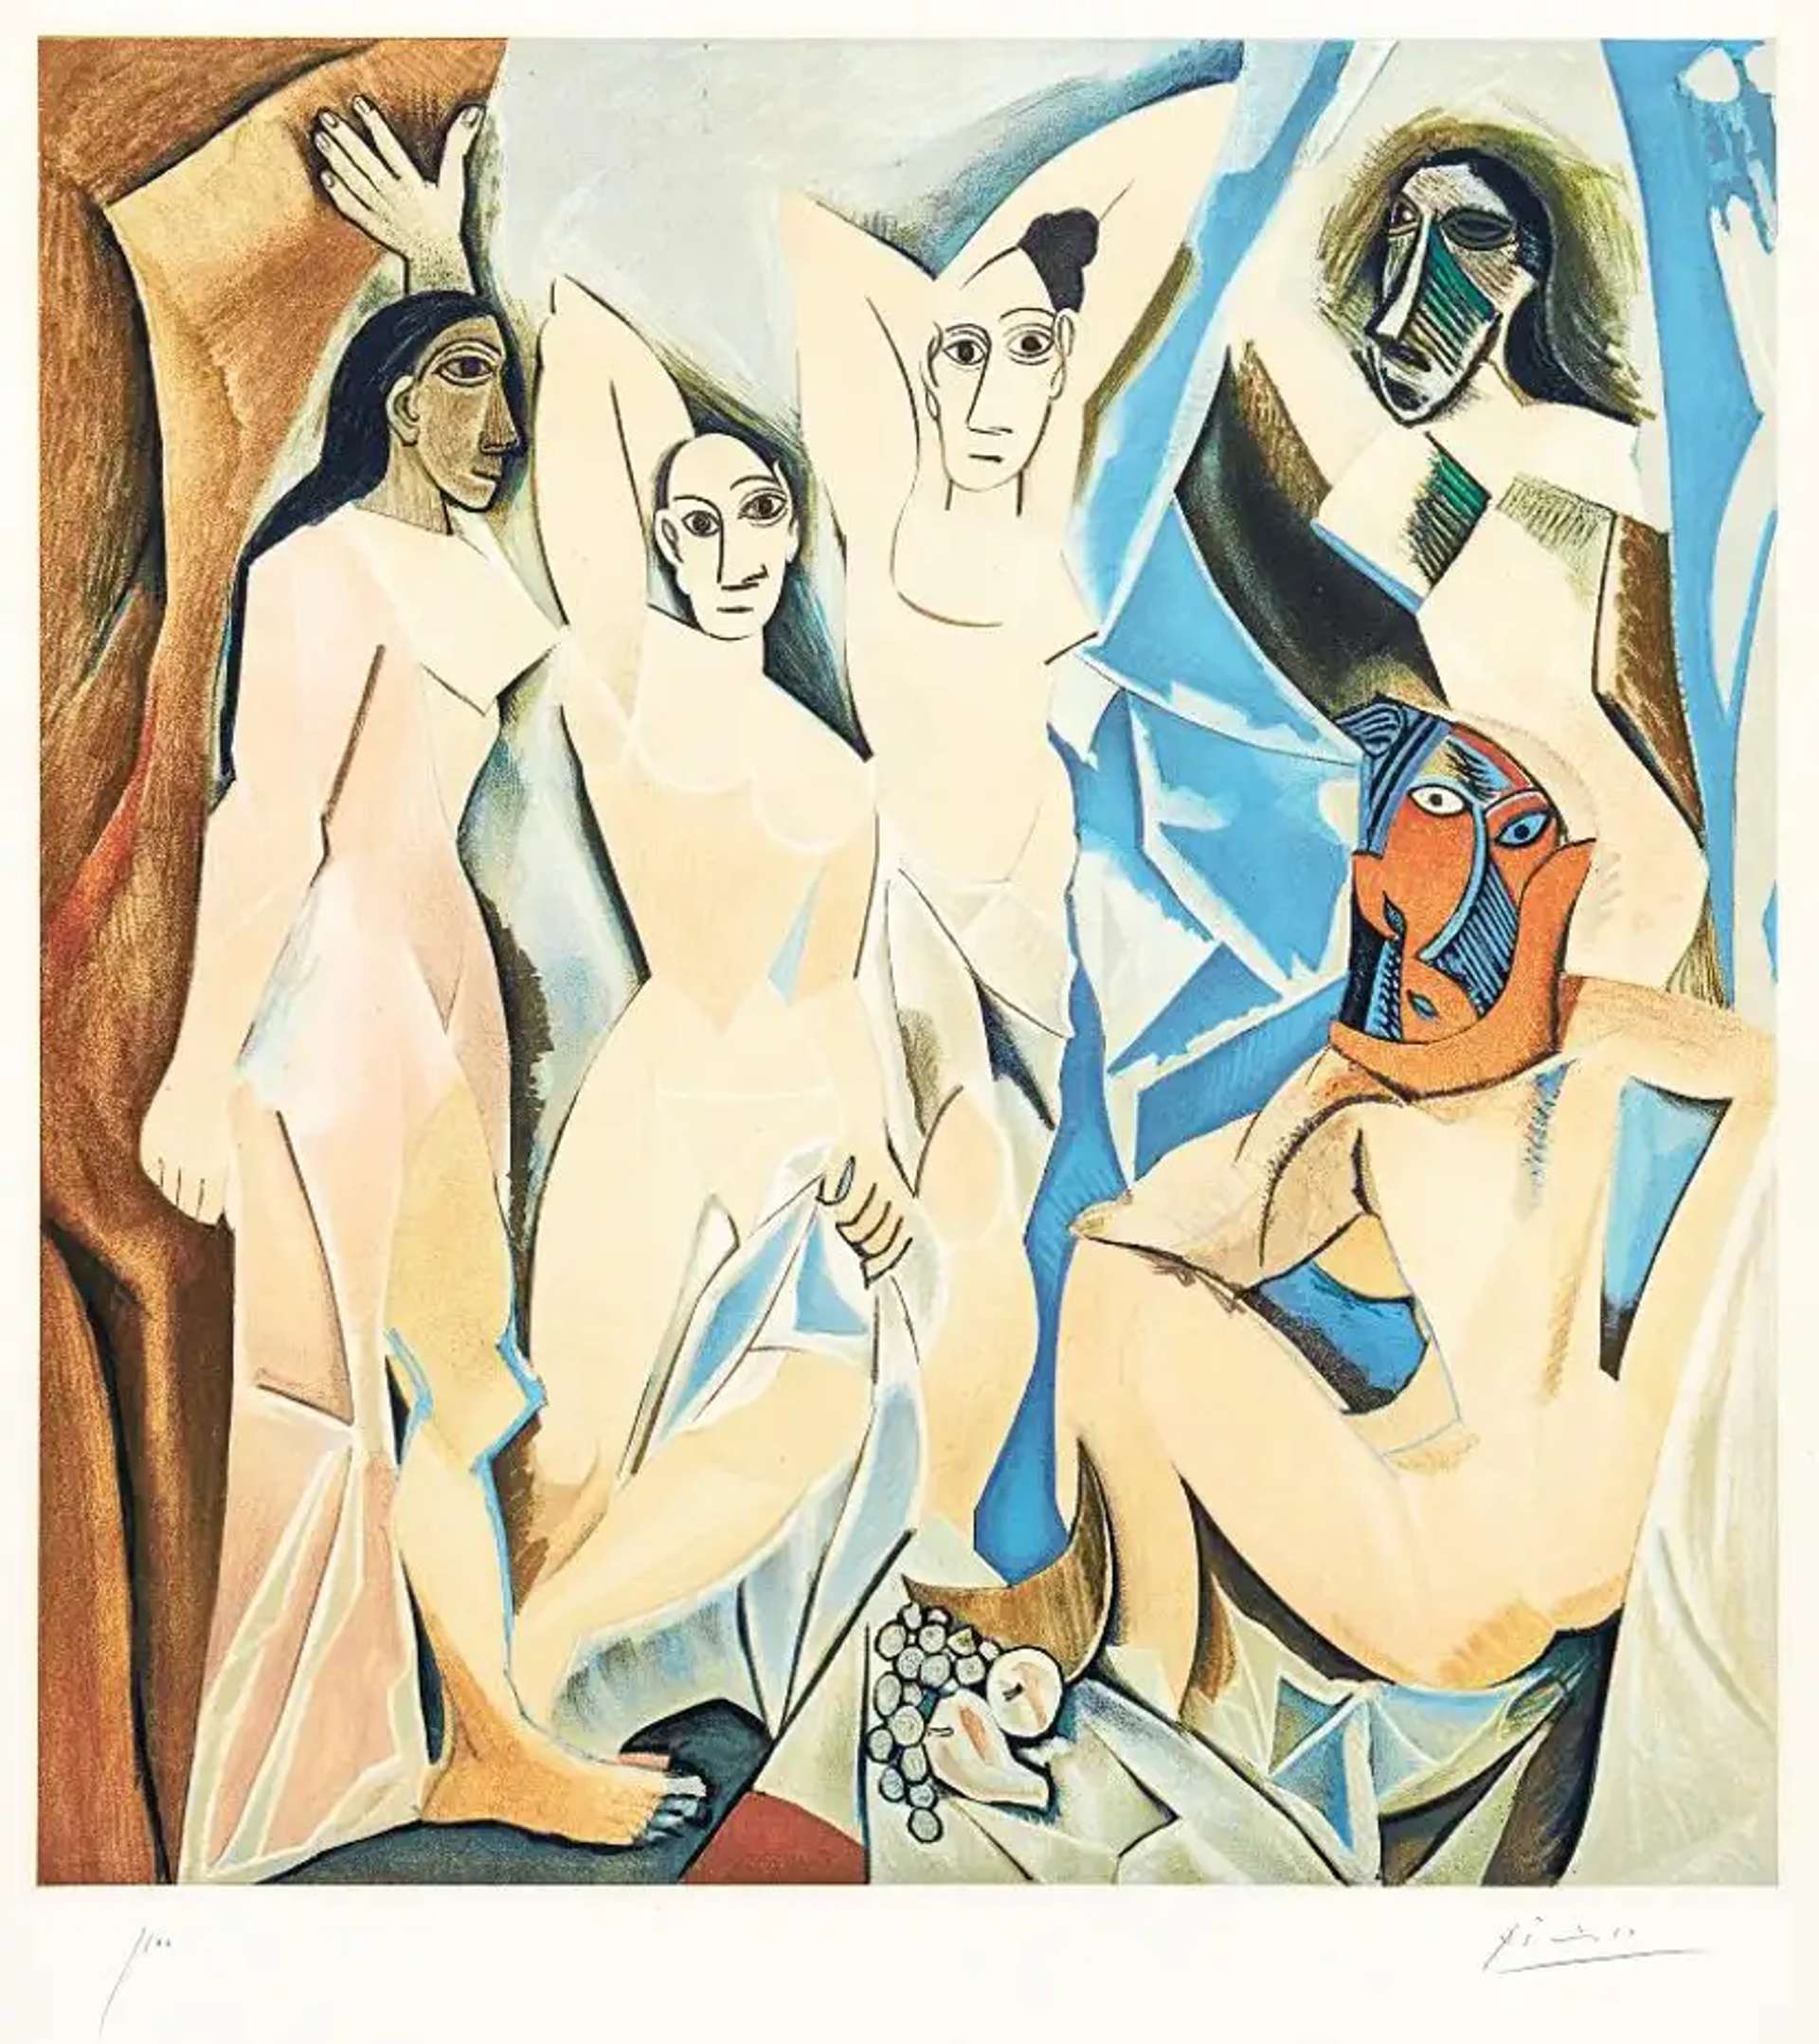 An image of the print Les Demoiselle d'Avignon by Pablo Picasso. It depicts five nude women in geometric shapes. The colour palette is muted, composed mostly of nudes and blues.